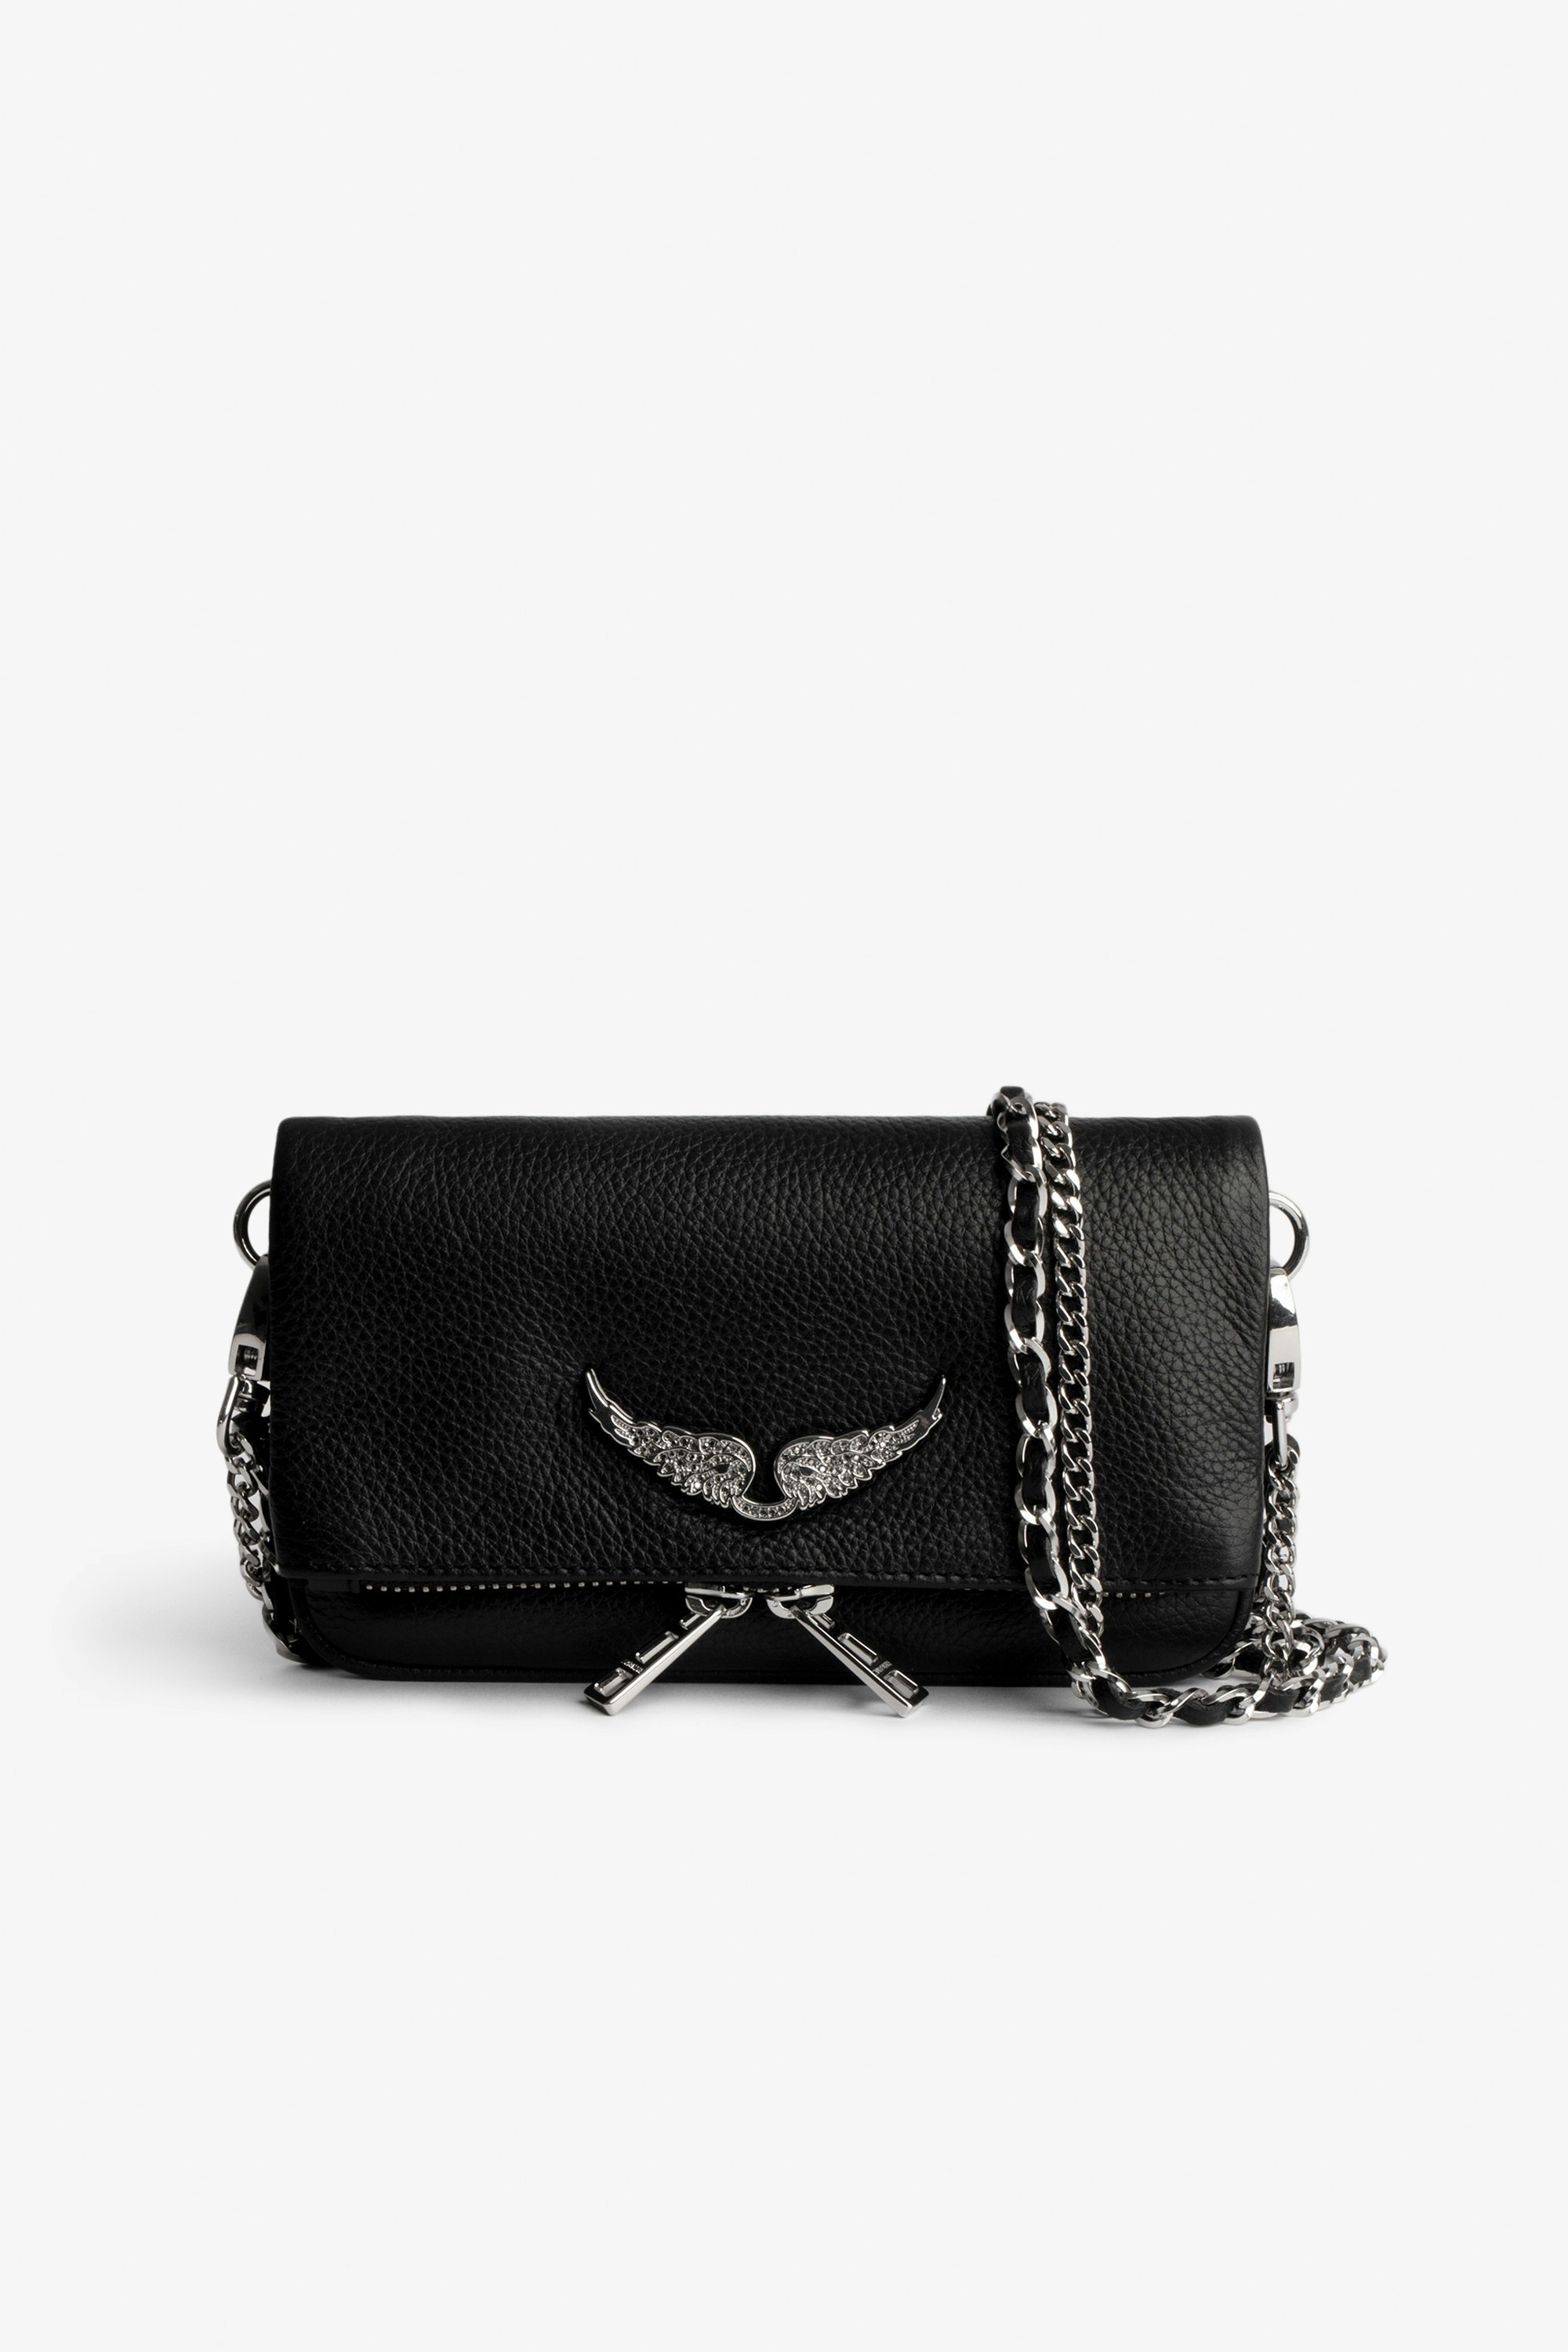 Swing Your Wings Rock Nano Clutch Women’s black grained leather Swing Your Wings Rock Nano clutch with leather shoulder strap and chain